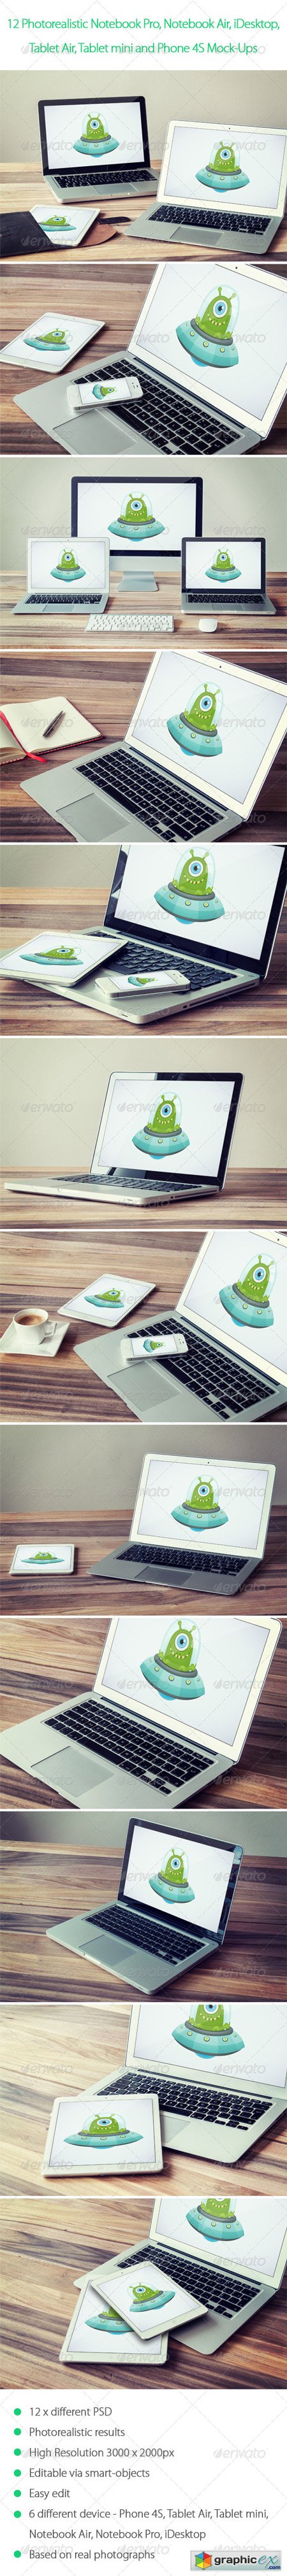 12 Photorealistic Notebook, Mobile Device Mock-Ups